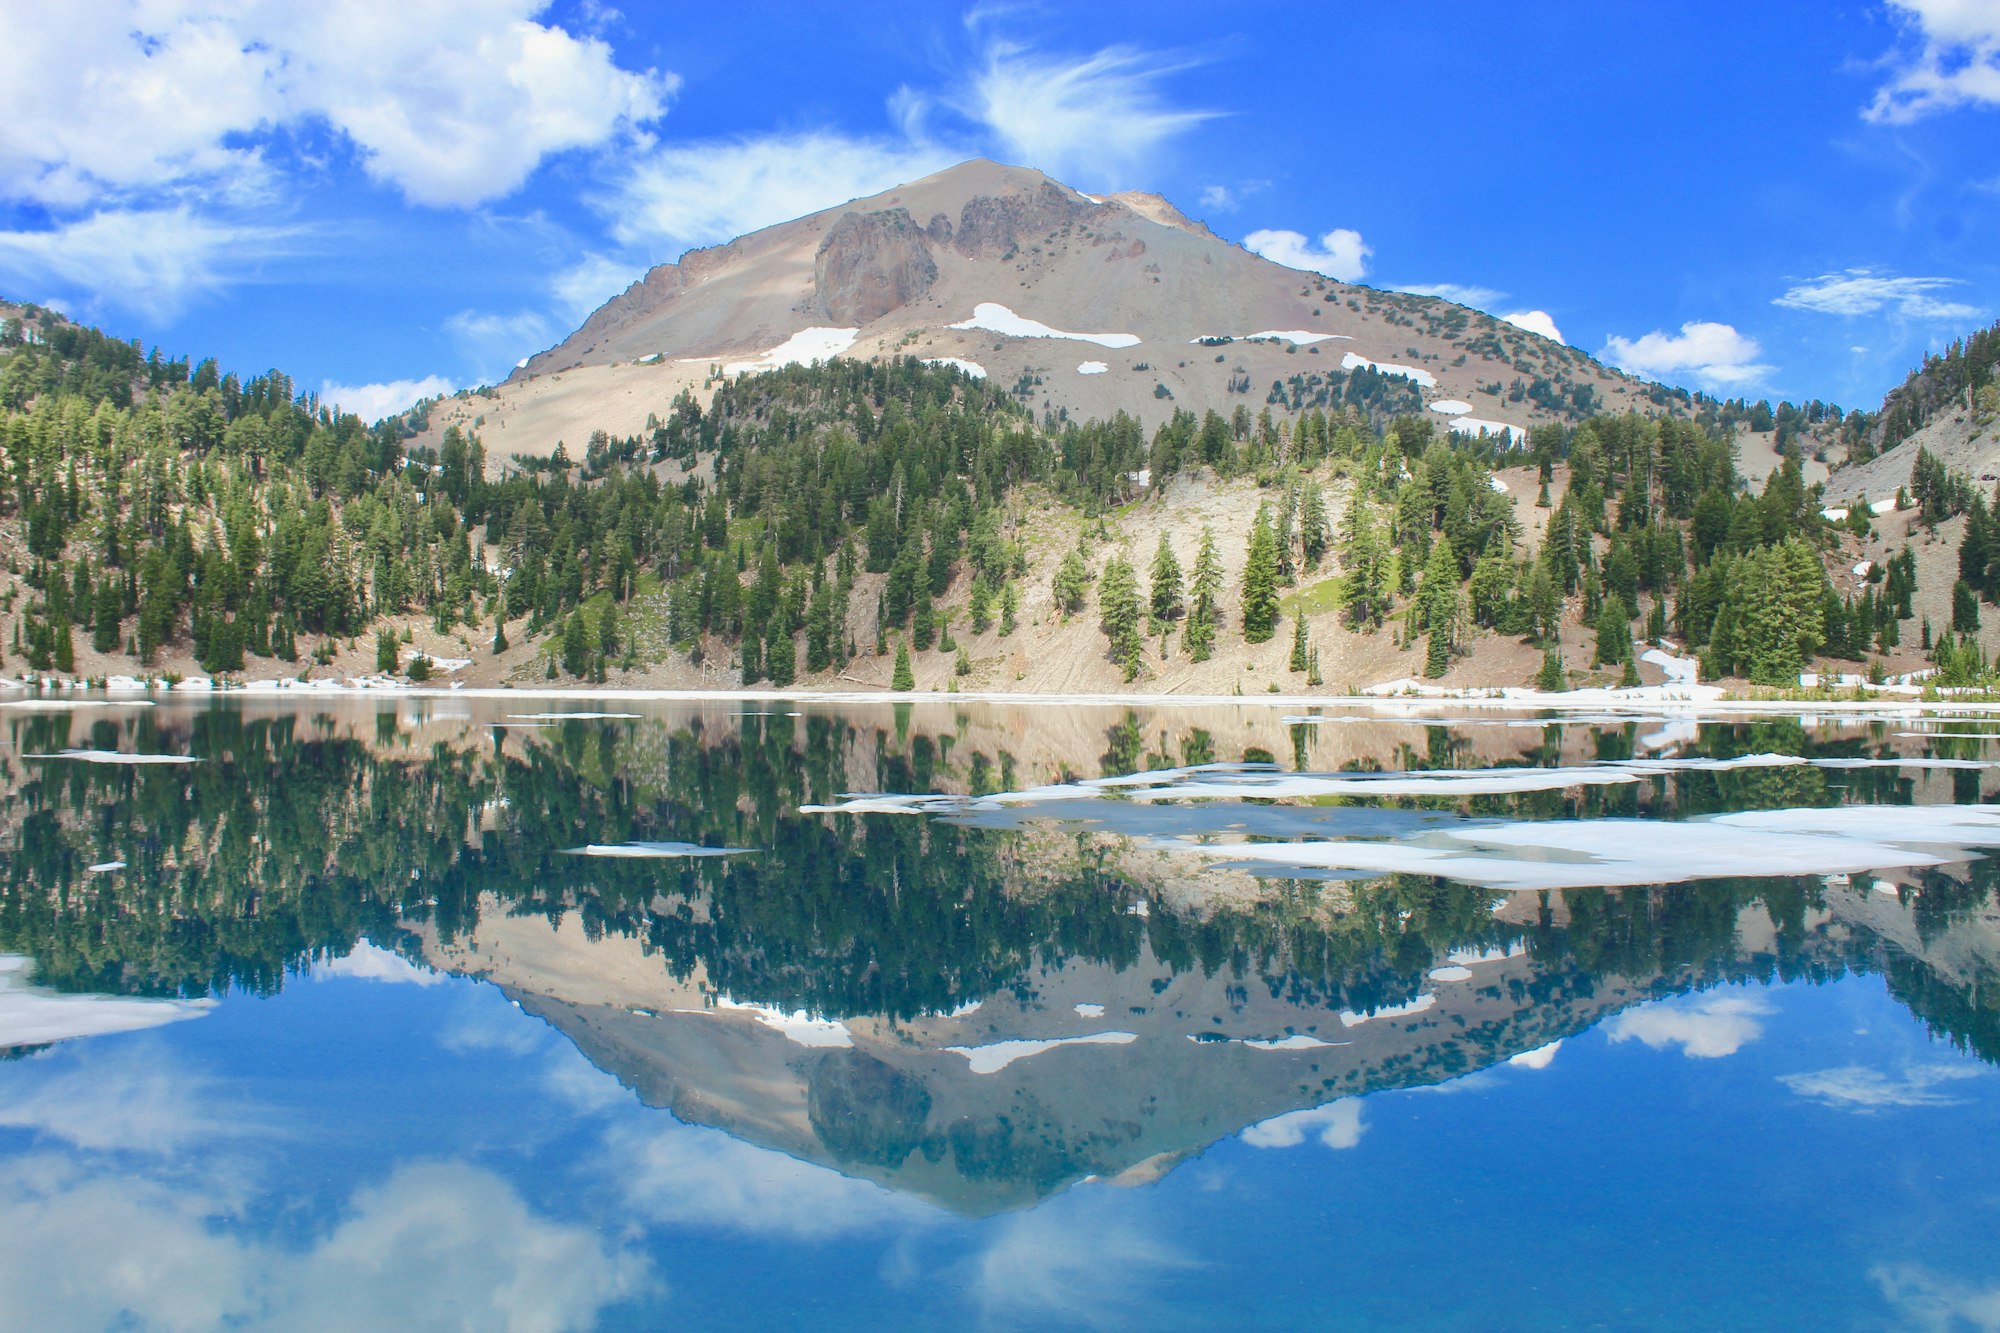 I was traveling around Lassen Volcanic National Park for a few days, and each day I went back to this spot because it would look drastically different throughout the day and I was captivated by it. First I took all the photos with my GoPro, but when I saw the lake this time it was so calm and simple and I wanted a smoother shot and thought I would use my DSLR.